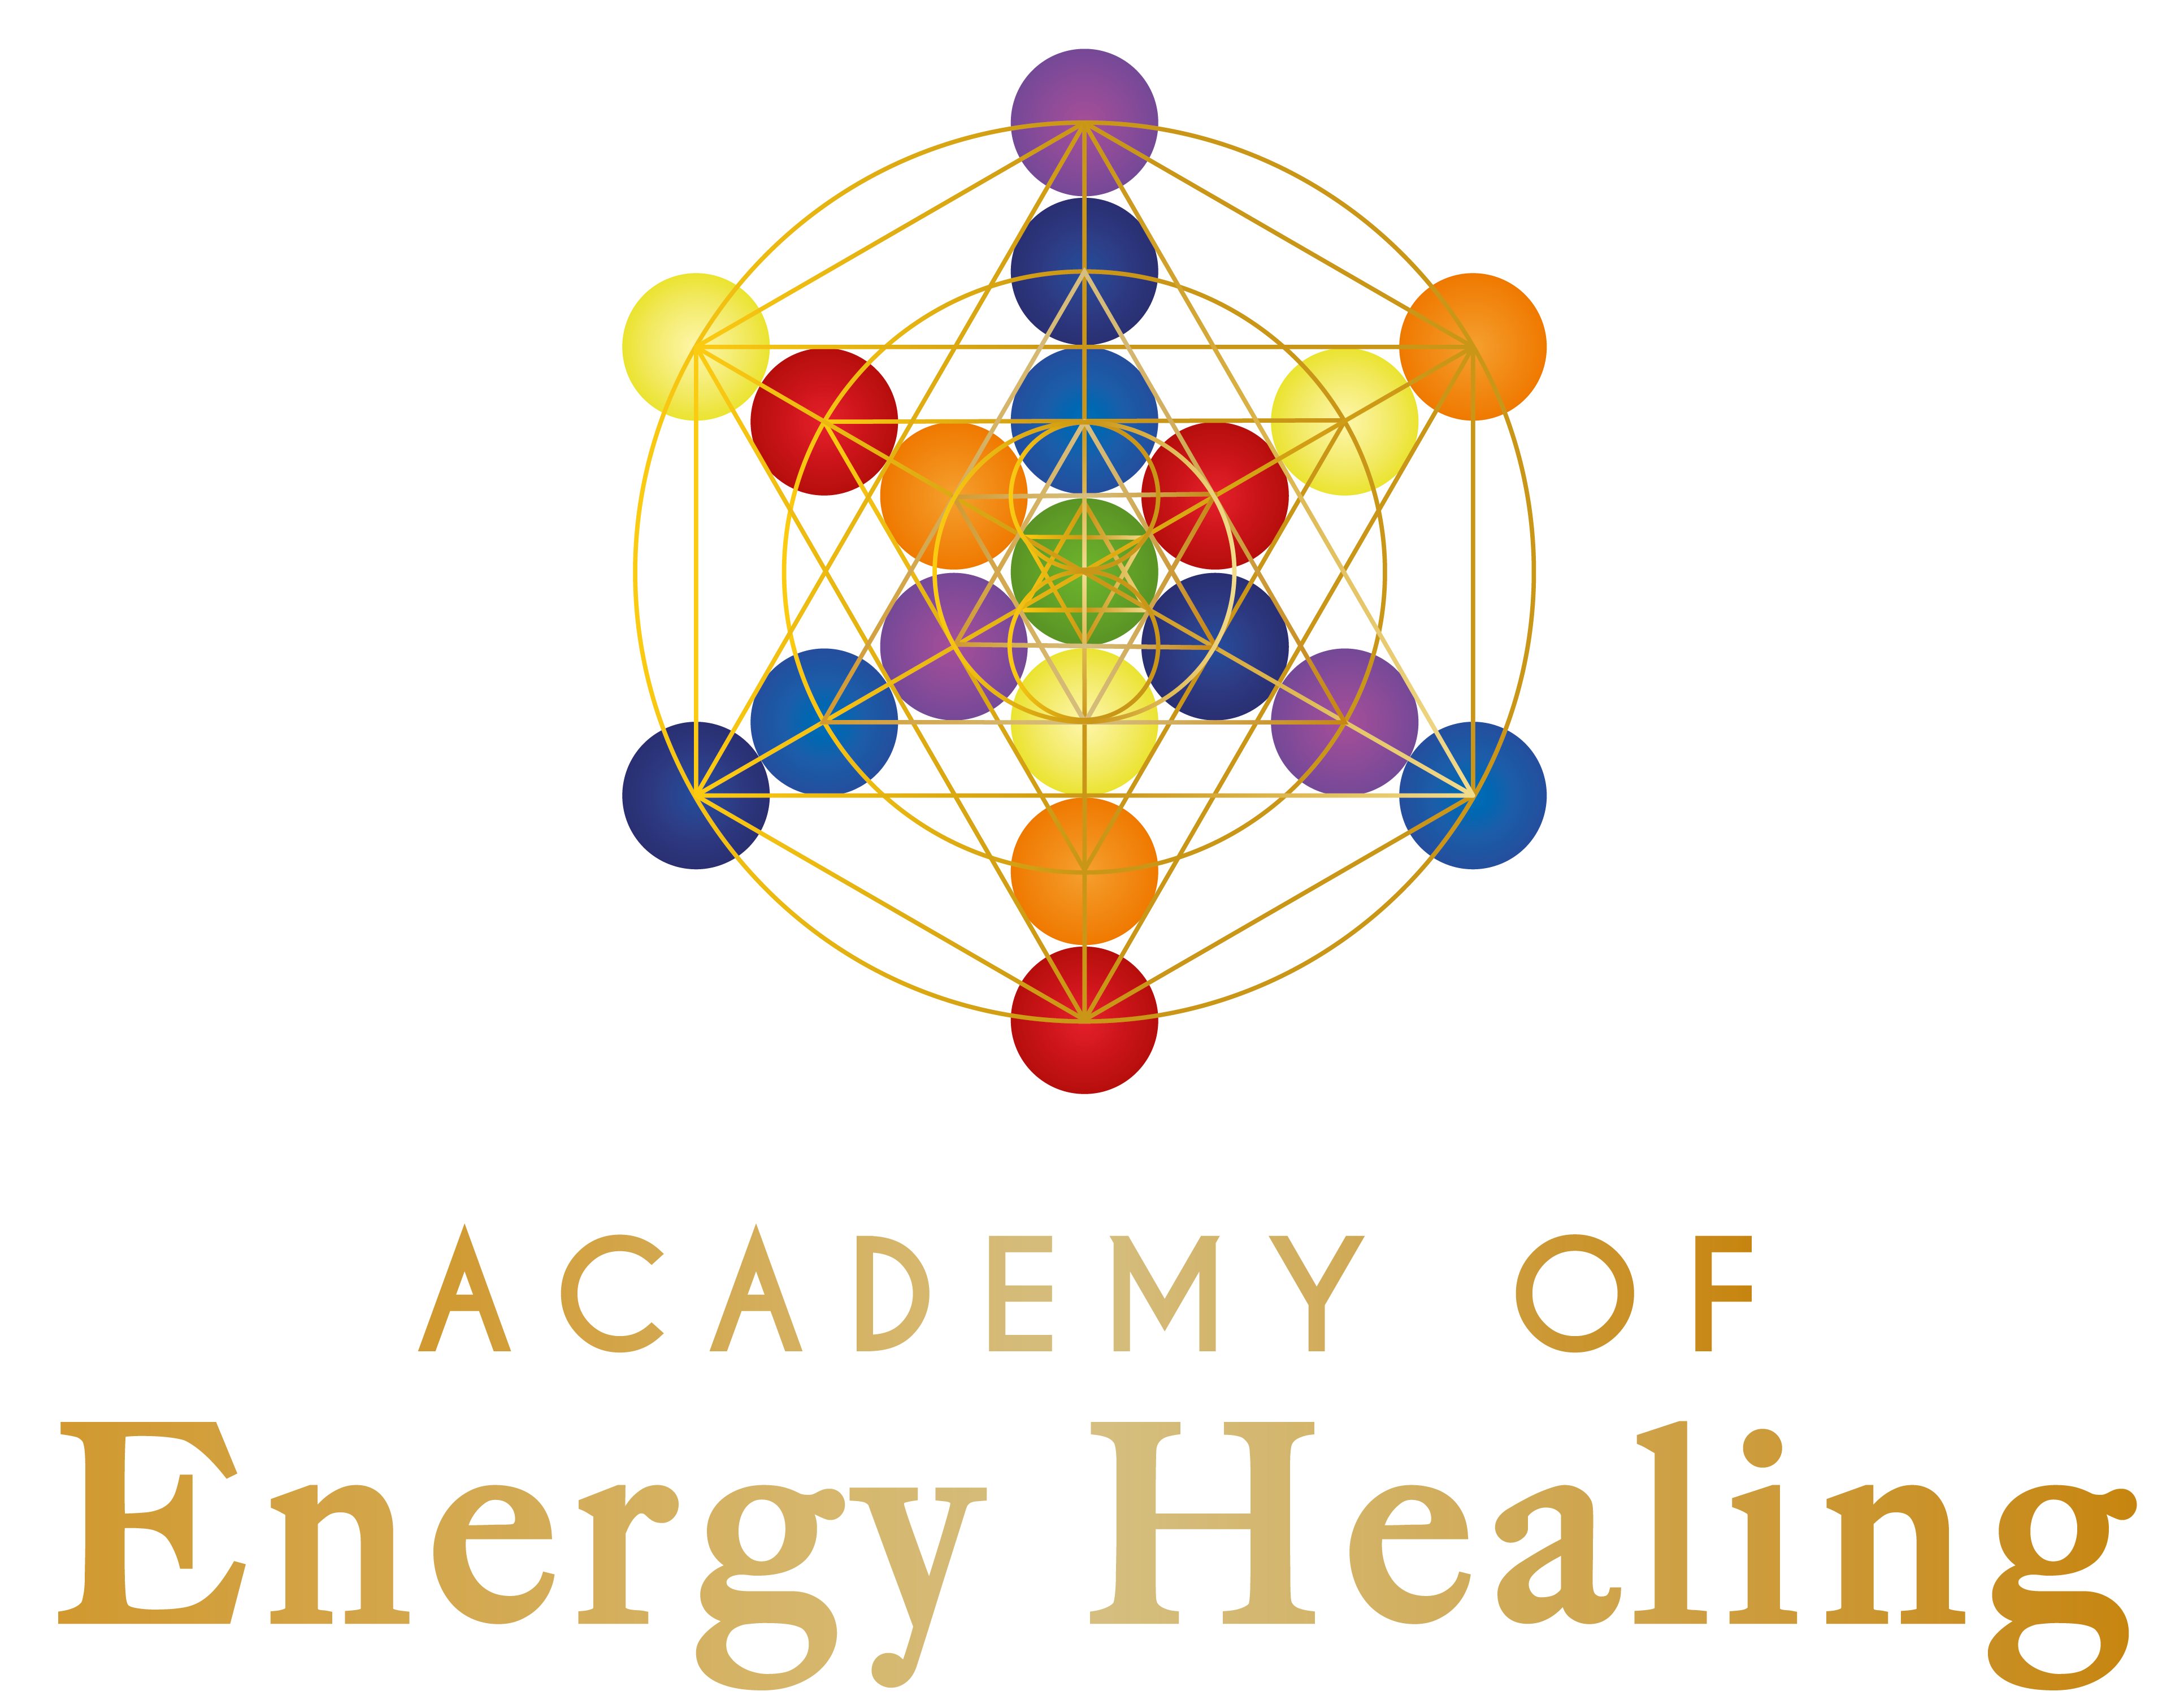 Academy of Energy Healing - Embody Your Higher Purpose By Becoming A Certified Energy Healer
